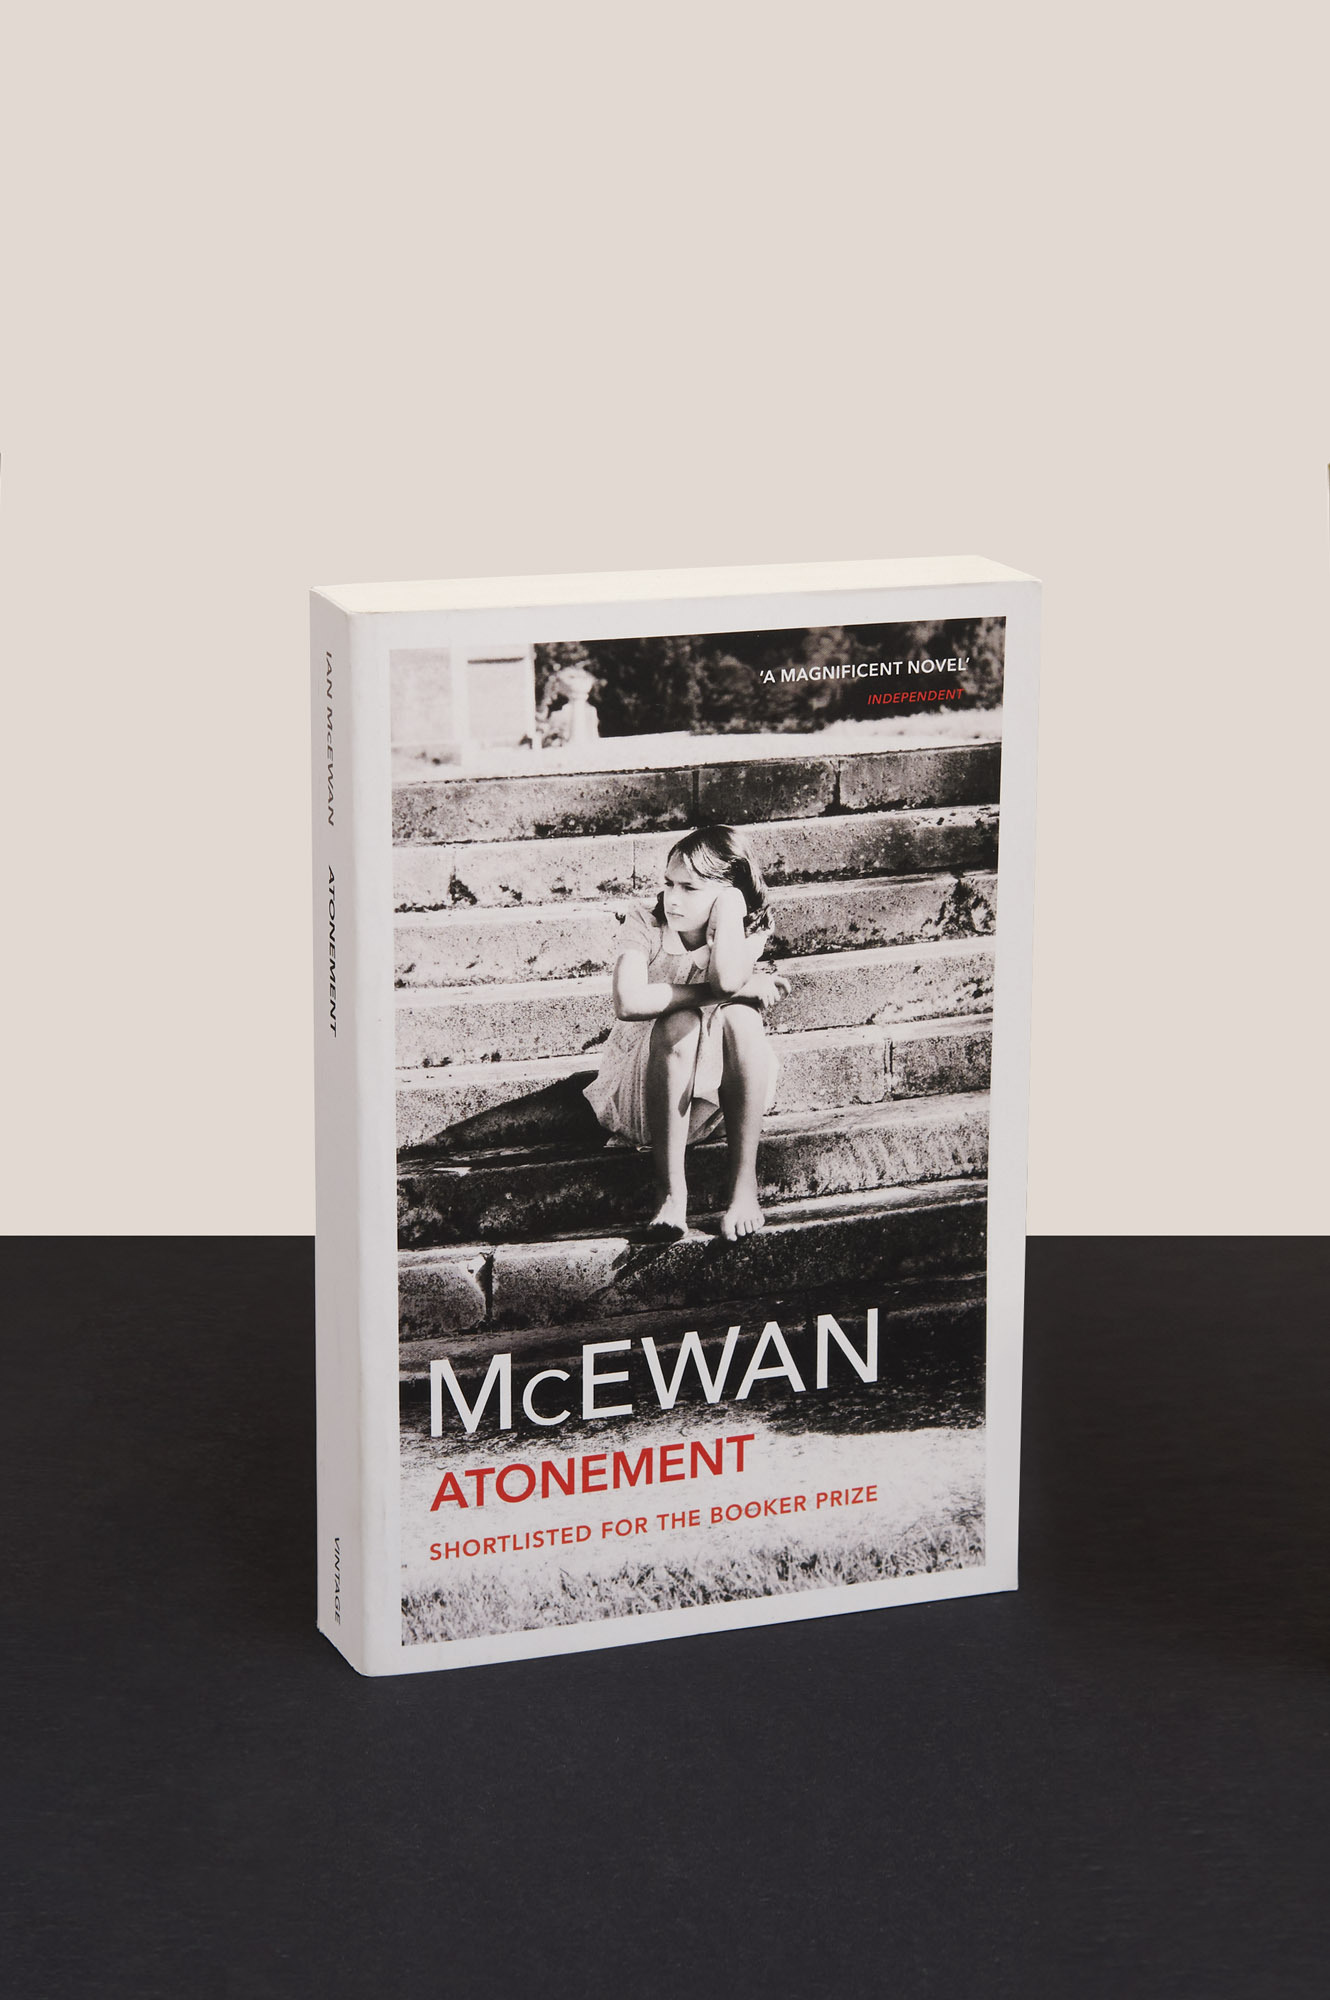 A photograph of the current paperback edition of Atonement